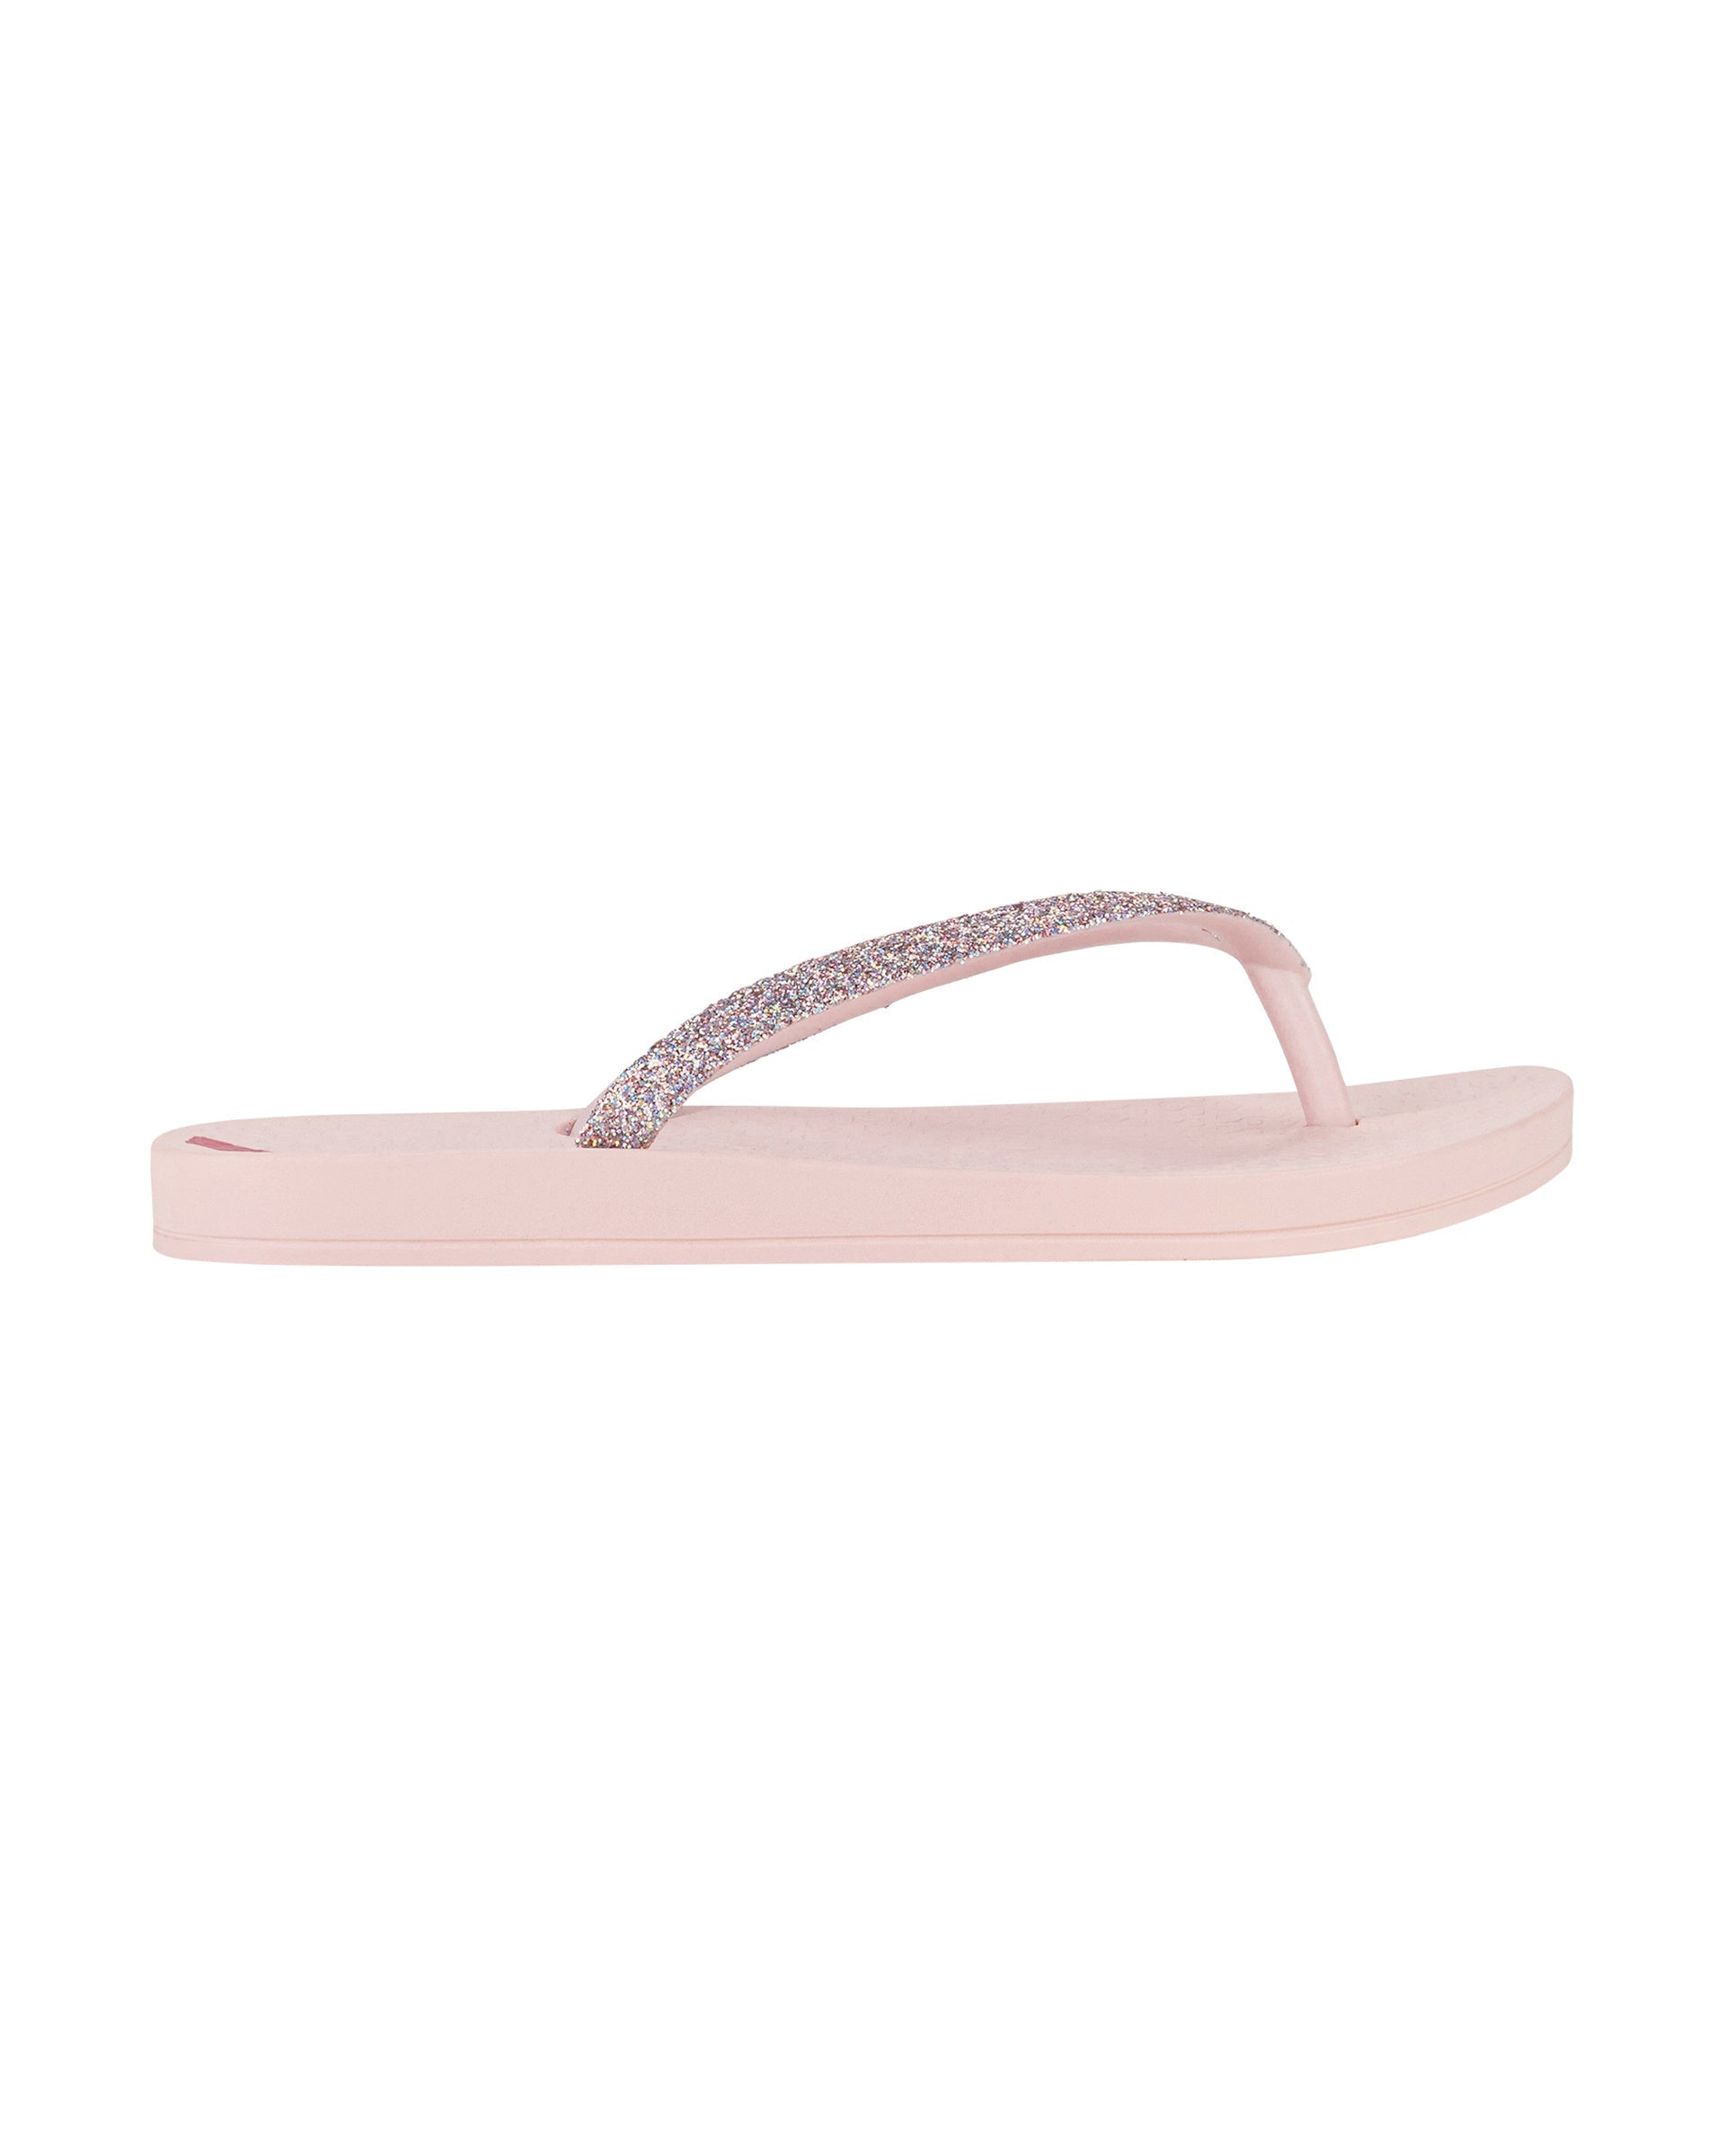 Outer side view of a pink Ipanema Ana Sparkle kids flip flop with multicolor glitter strap.